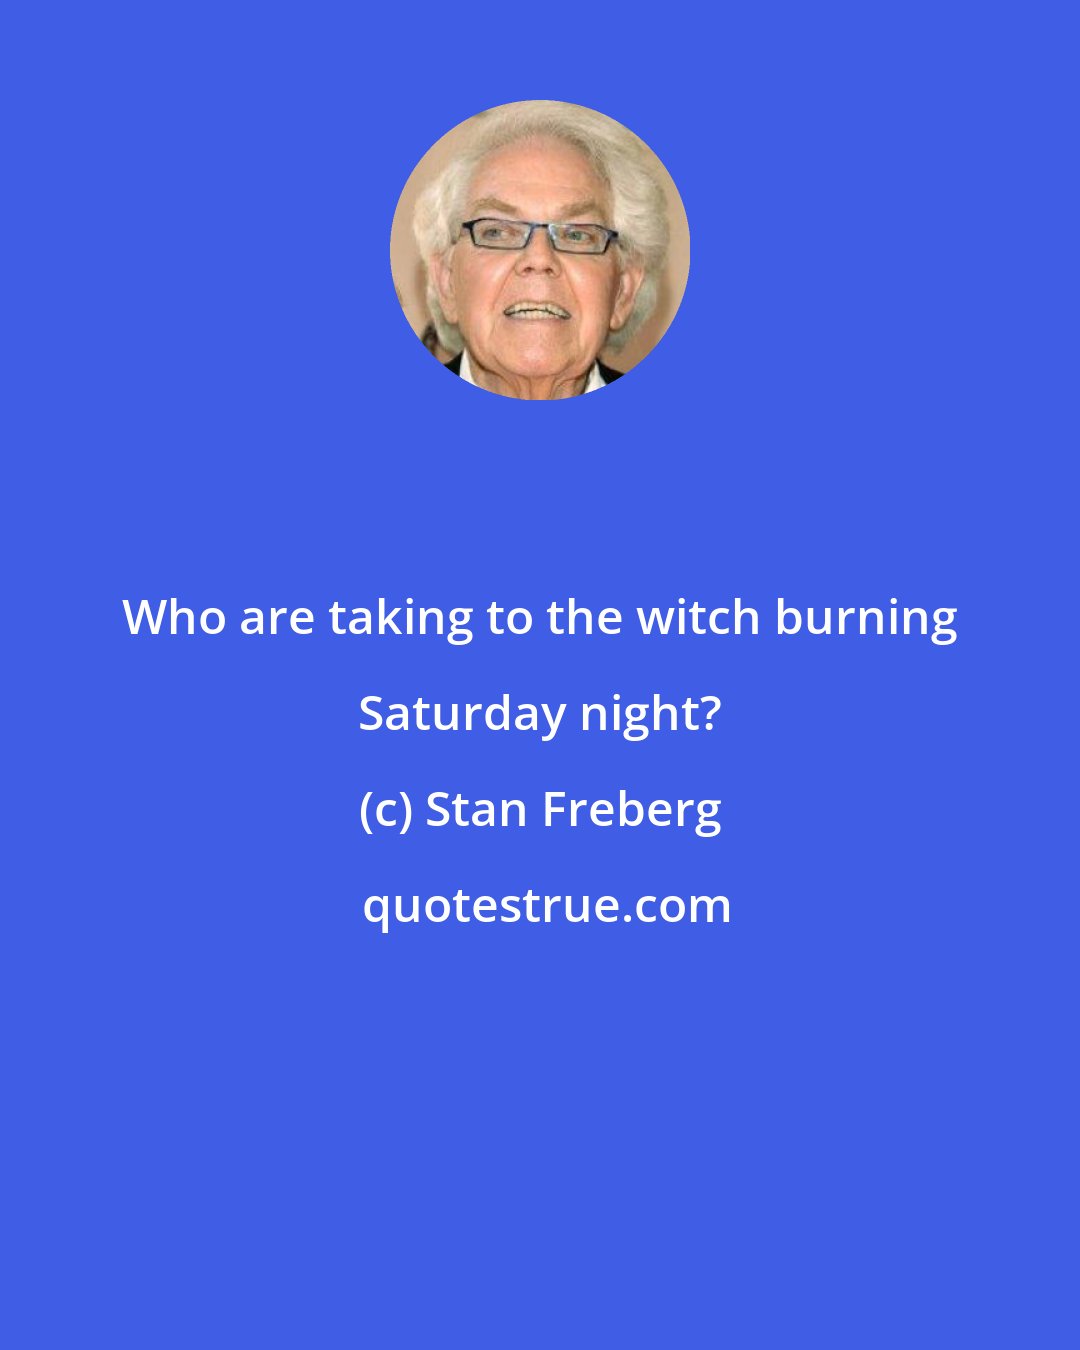 Stan Freberg: Who are taking to the witch burning Saturday night?